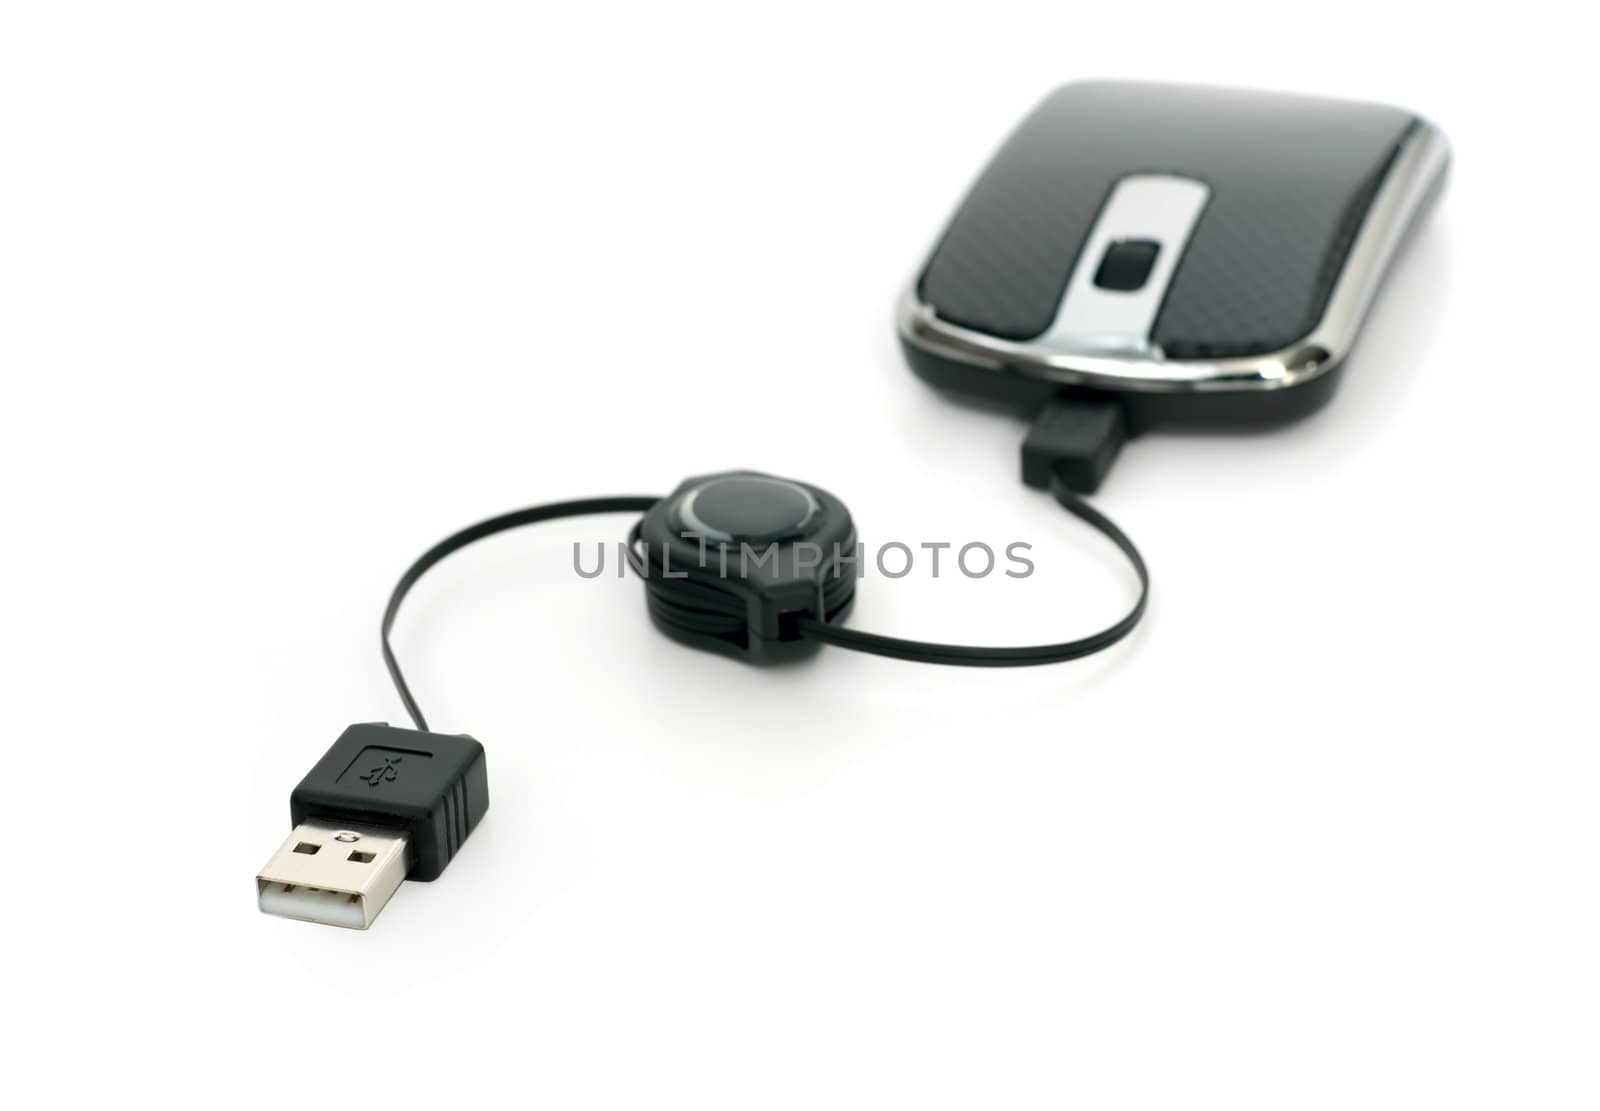 Black mouse for notebook on white background